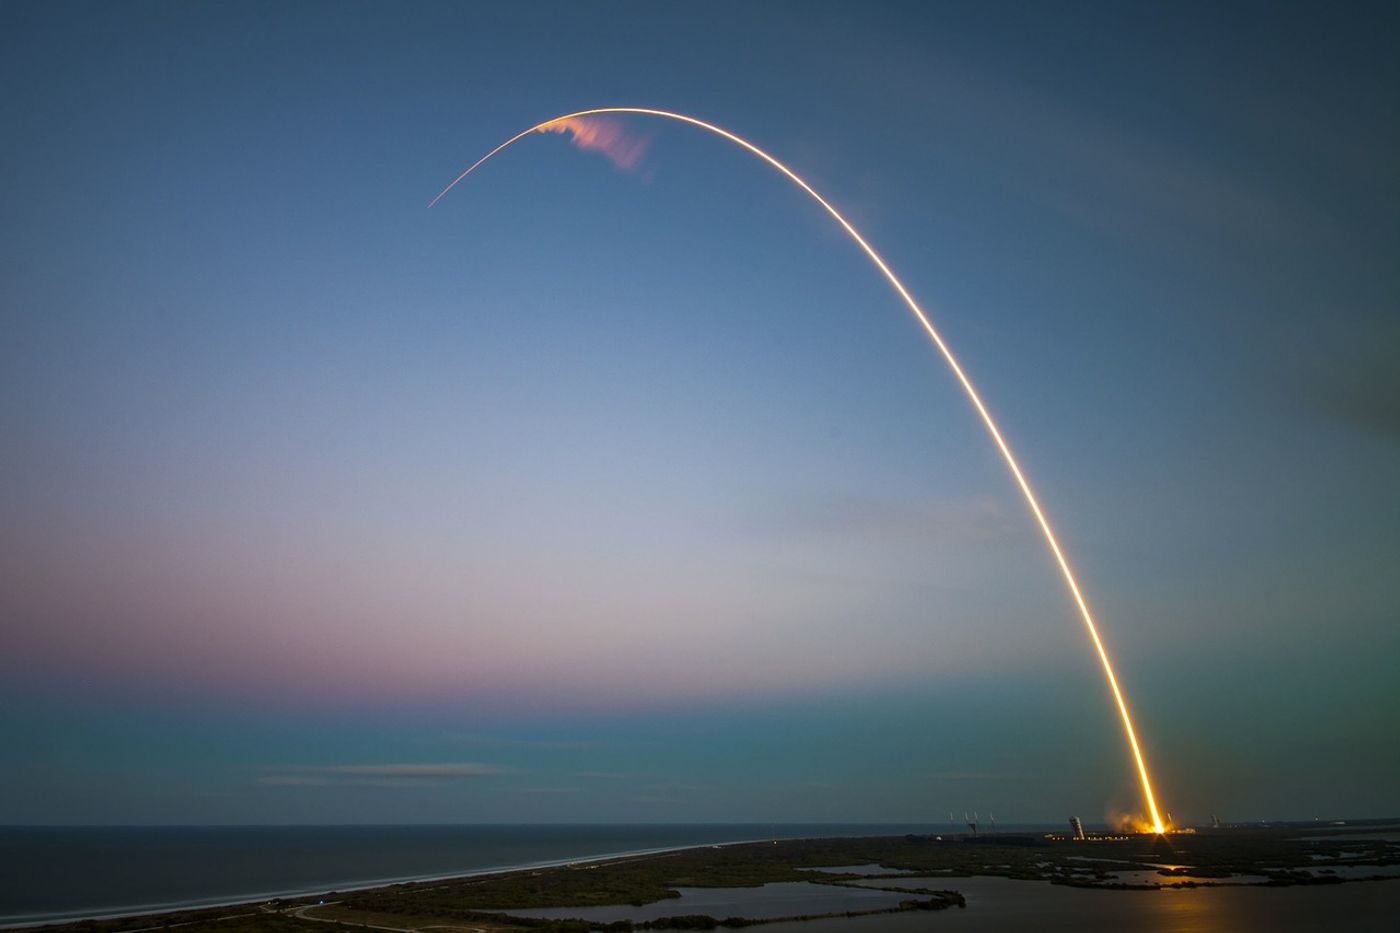 An image of a SpaceX Falcon 9 rocket launching from Cape Canaveral, Florida.